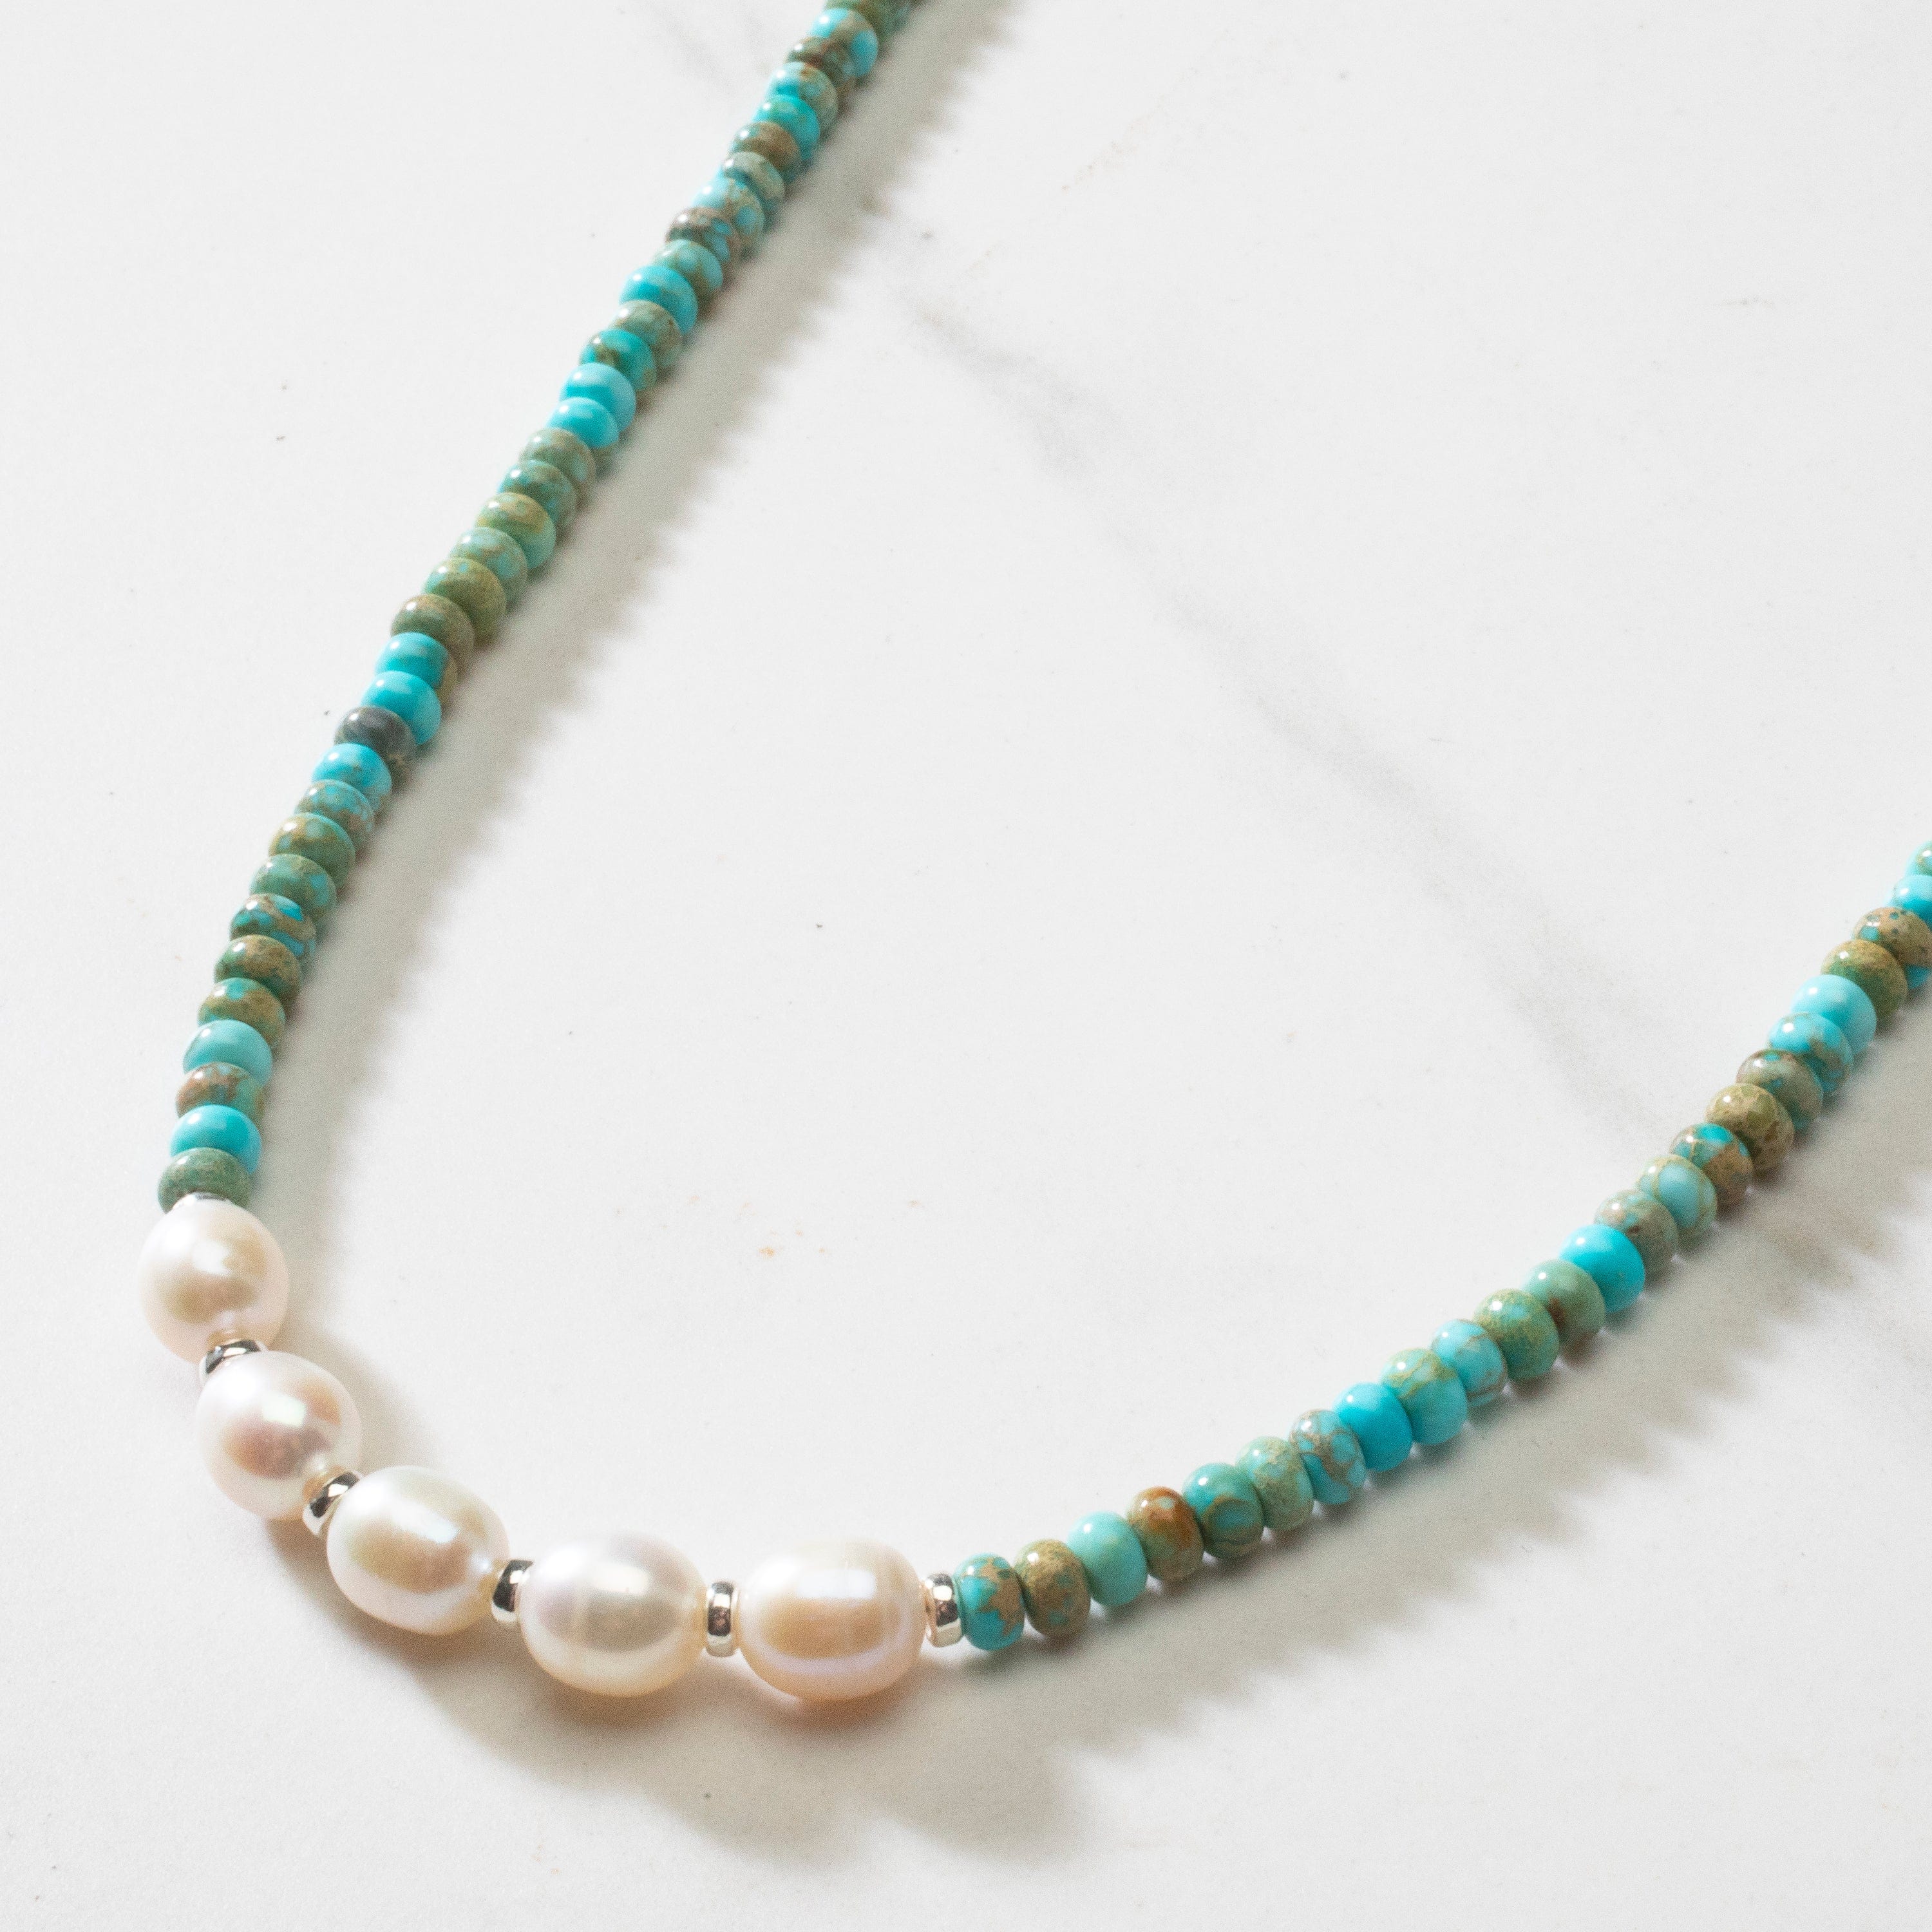 KALIFANO Jewelry 4mm Faceted King Howlite Turquoise Bead Necklace with 5 Pearls with 925 Silver Clasp 4MKT